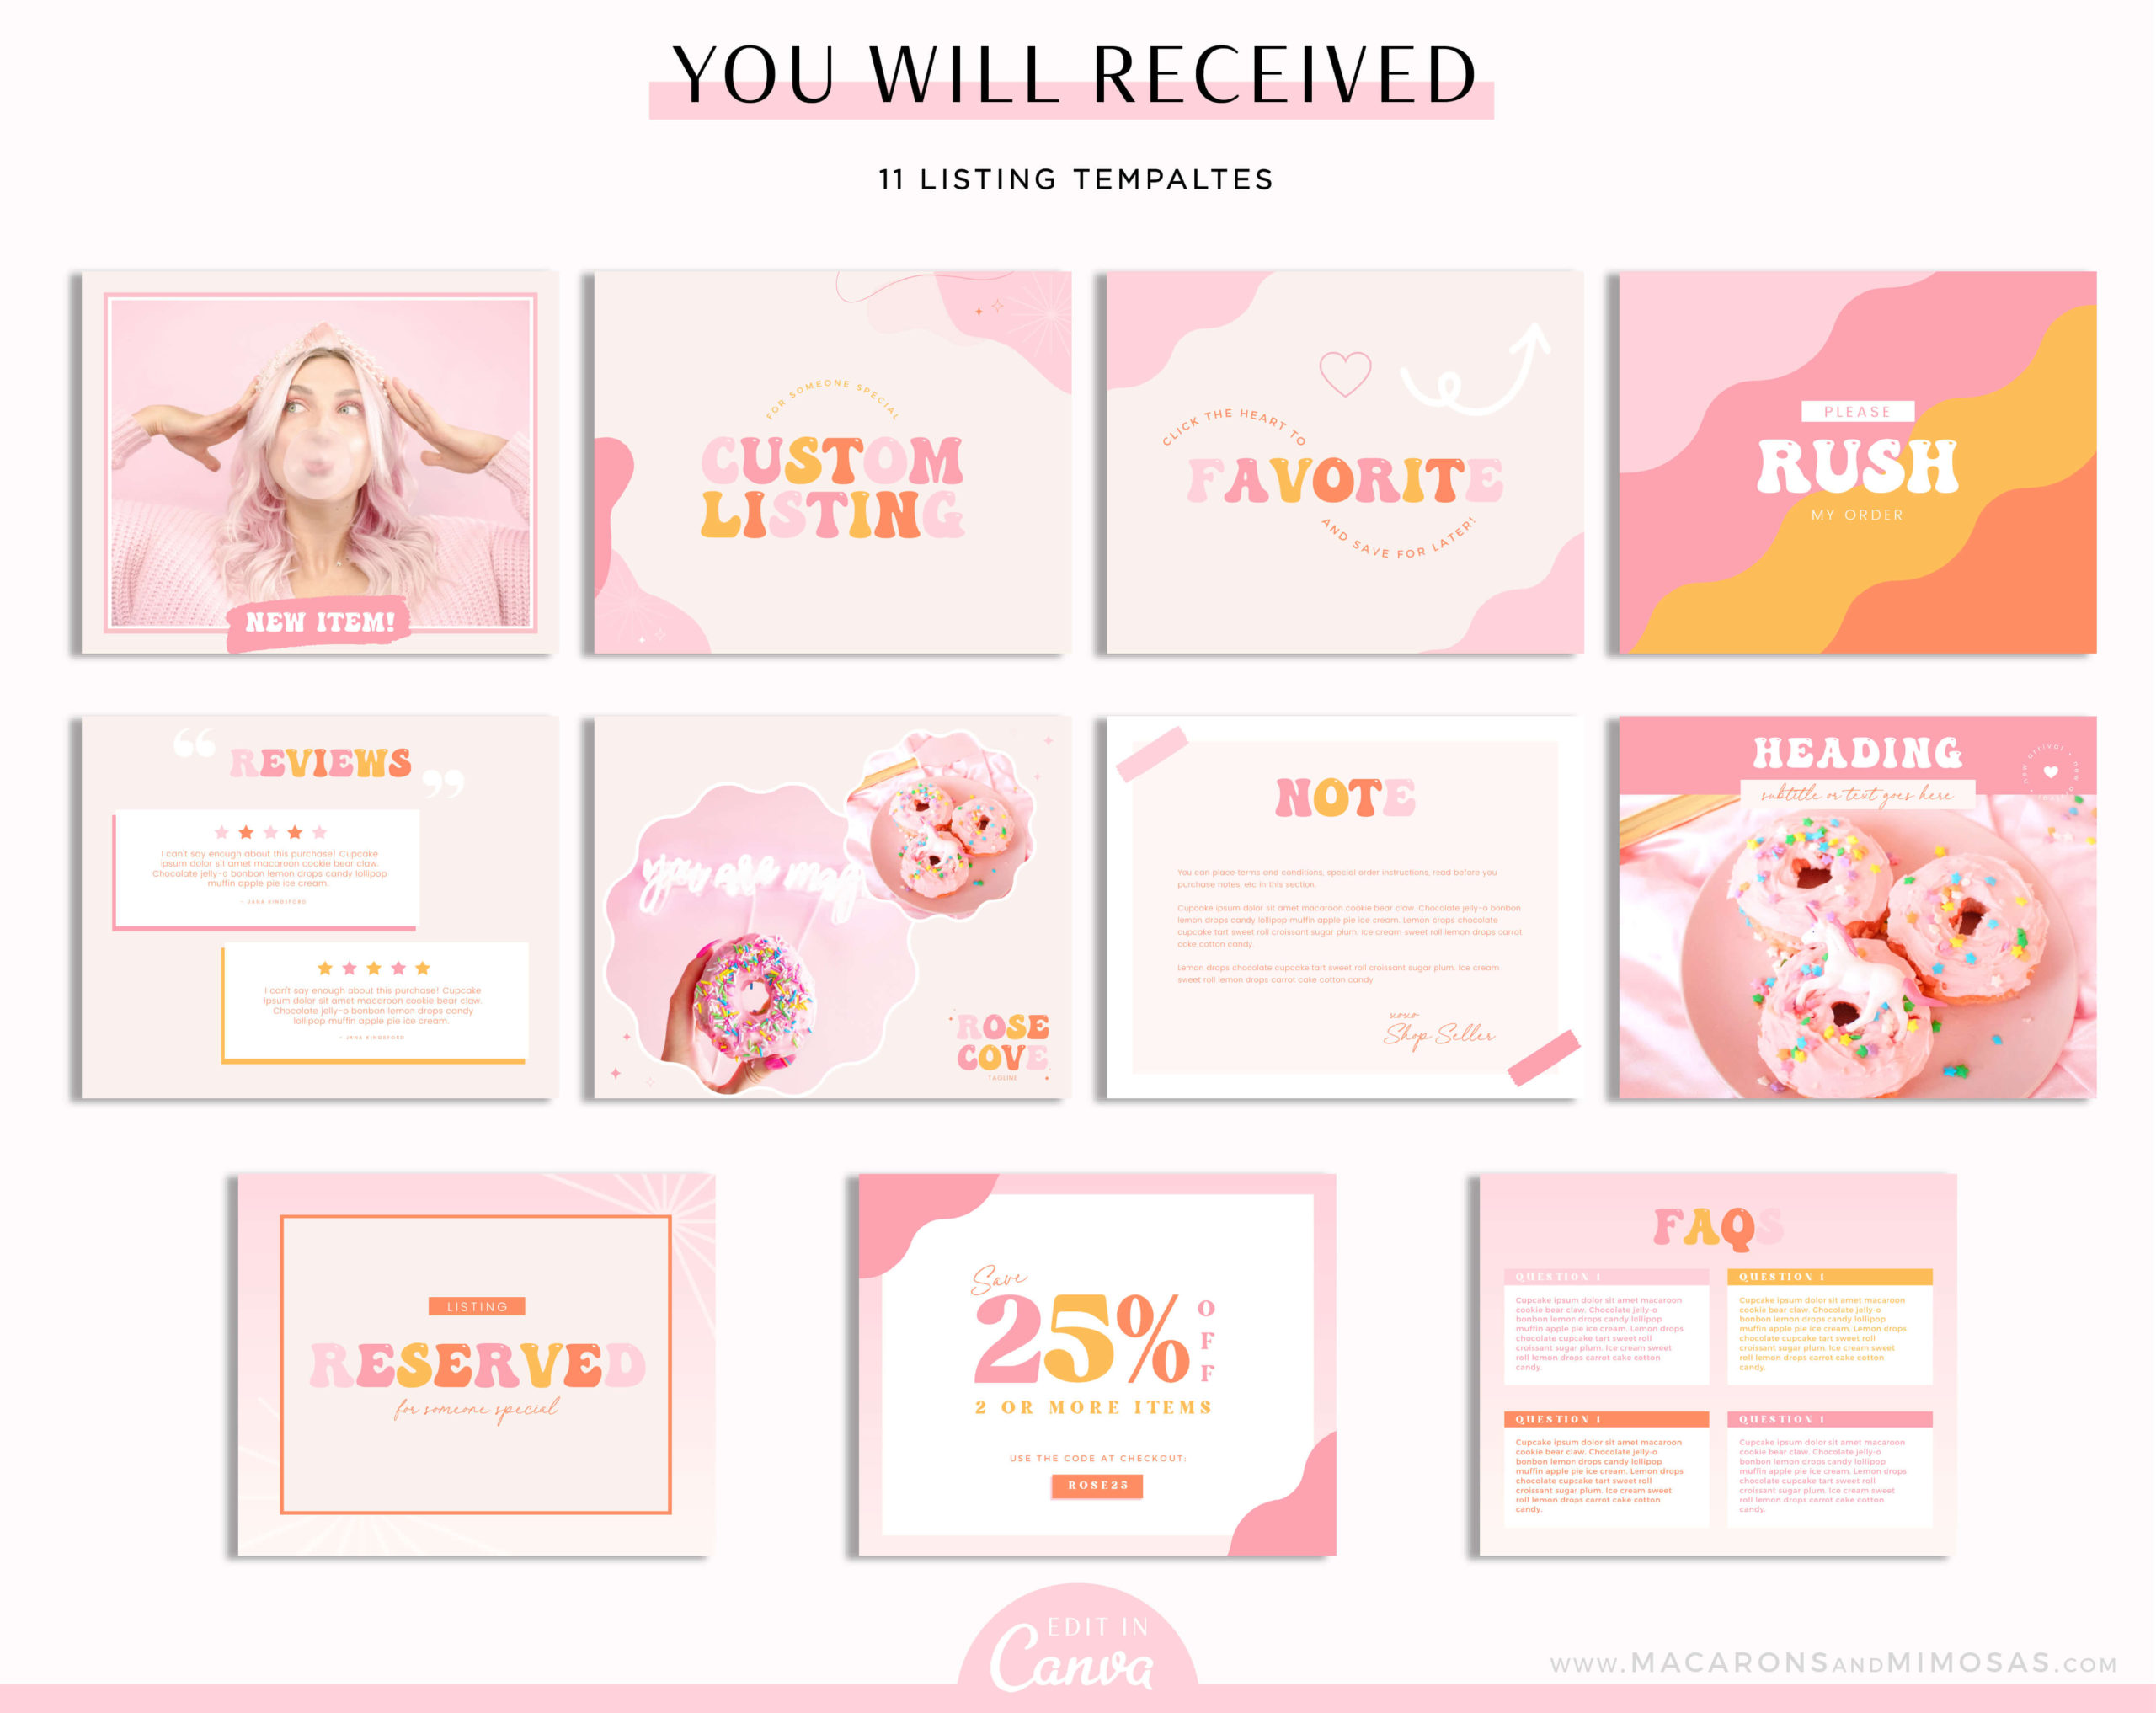 Bright Etsy Shop Branding Kit customizable in Canva, Brand your Etsy Shop Business with Pretty Logos and Branding Kit, Etsy Seller Sucess Shop Set and Tips